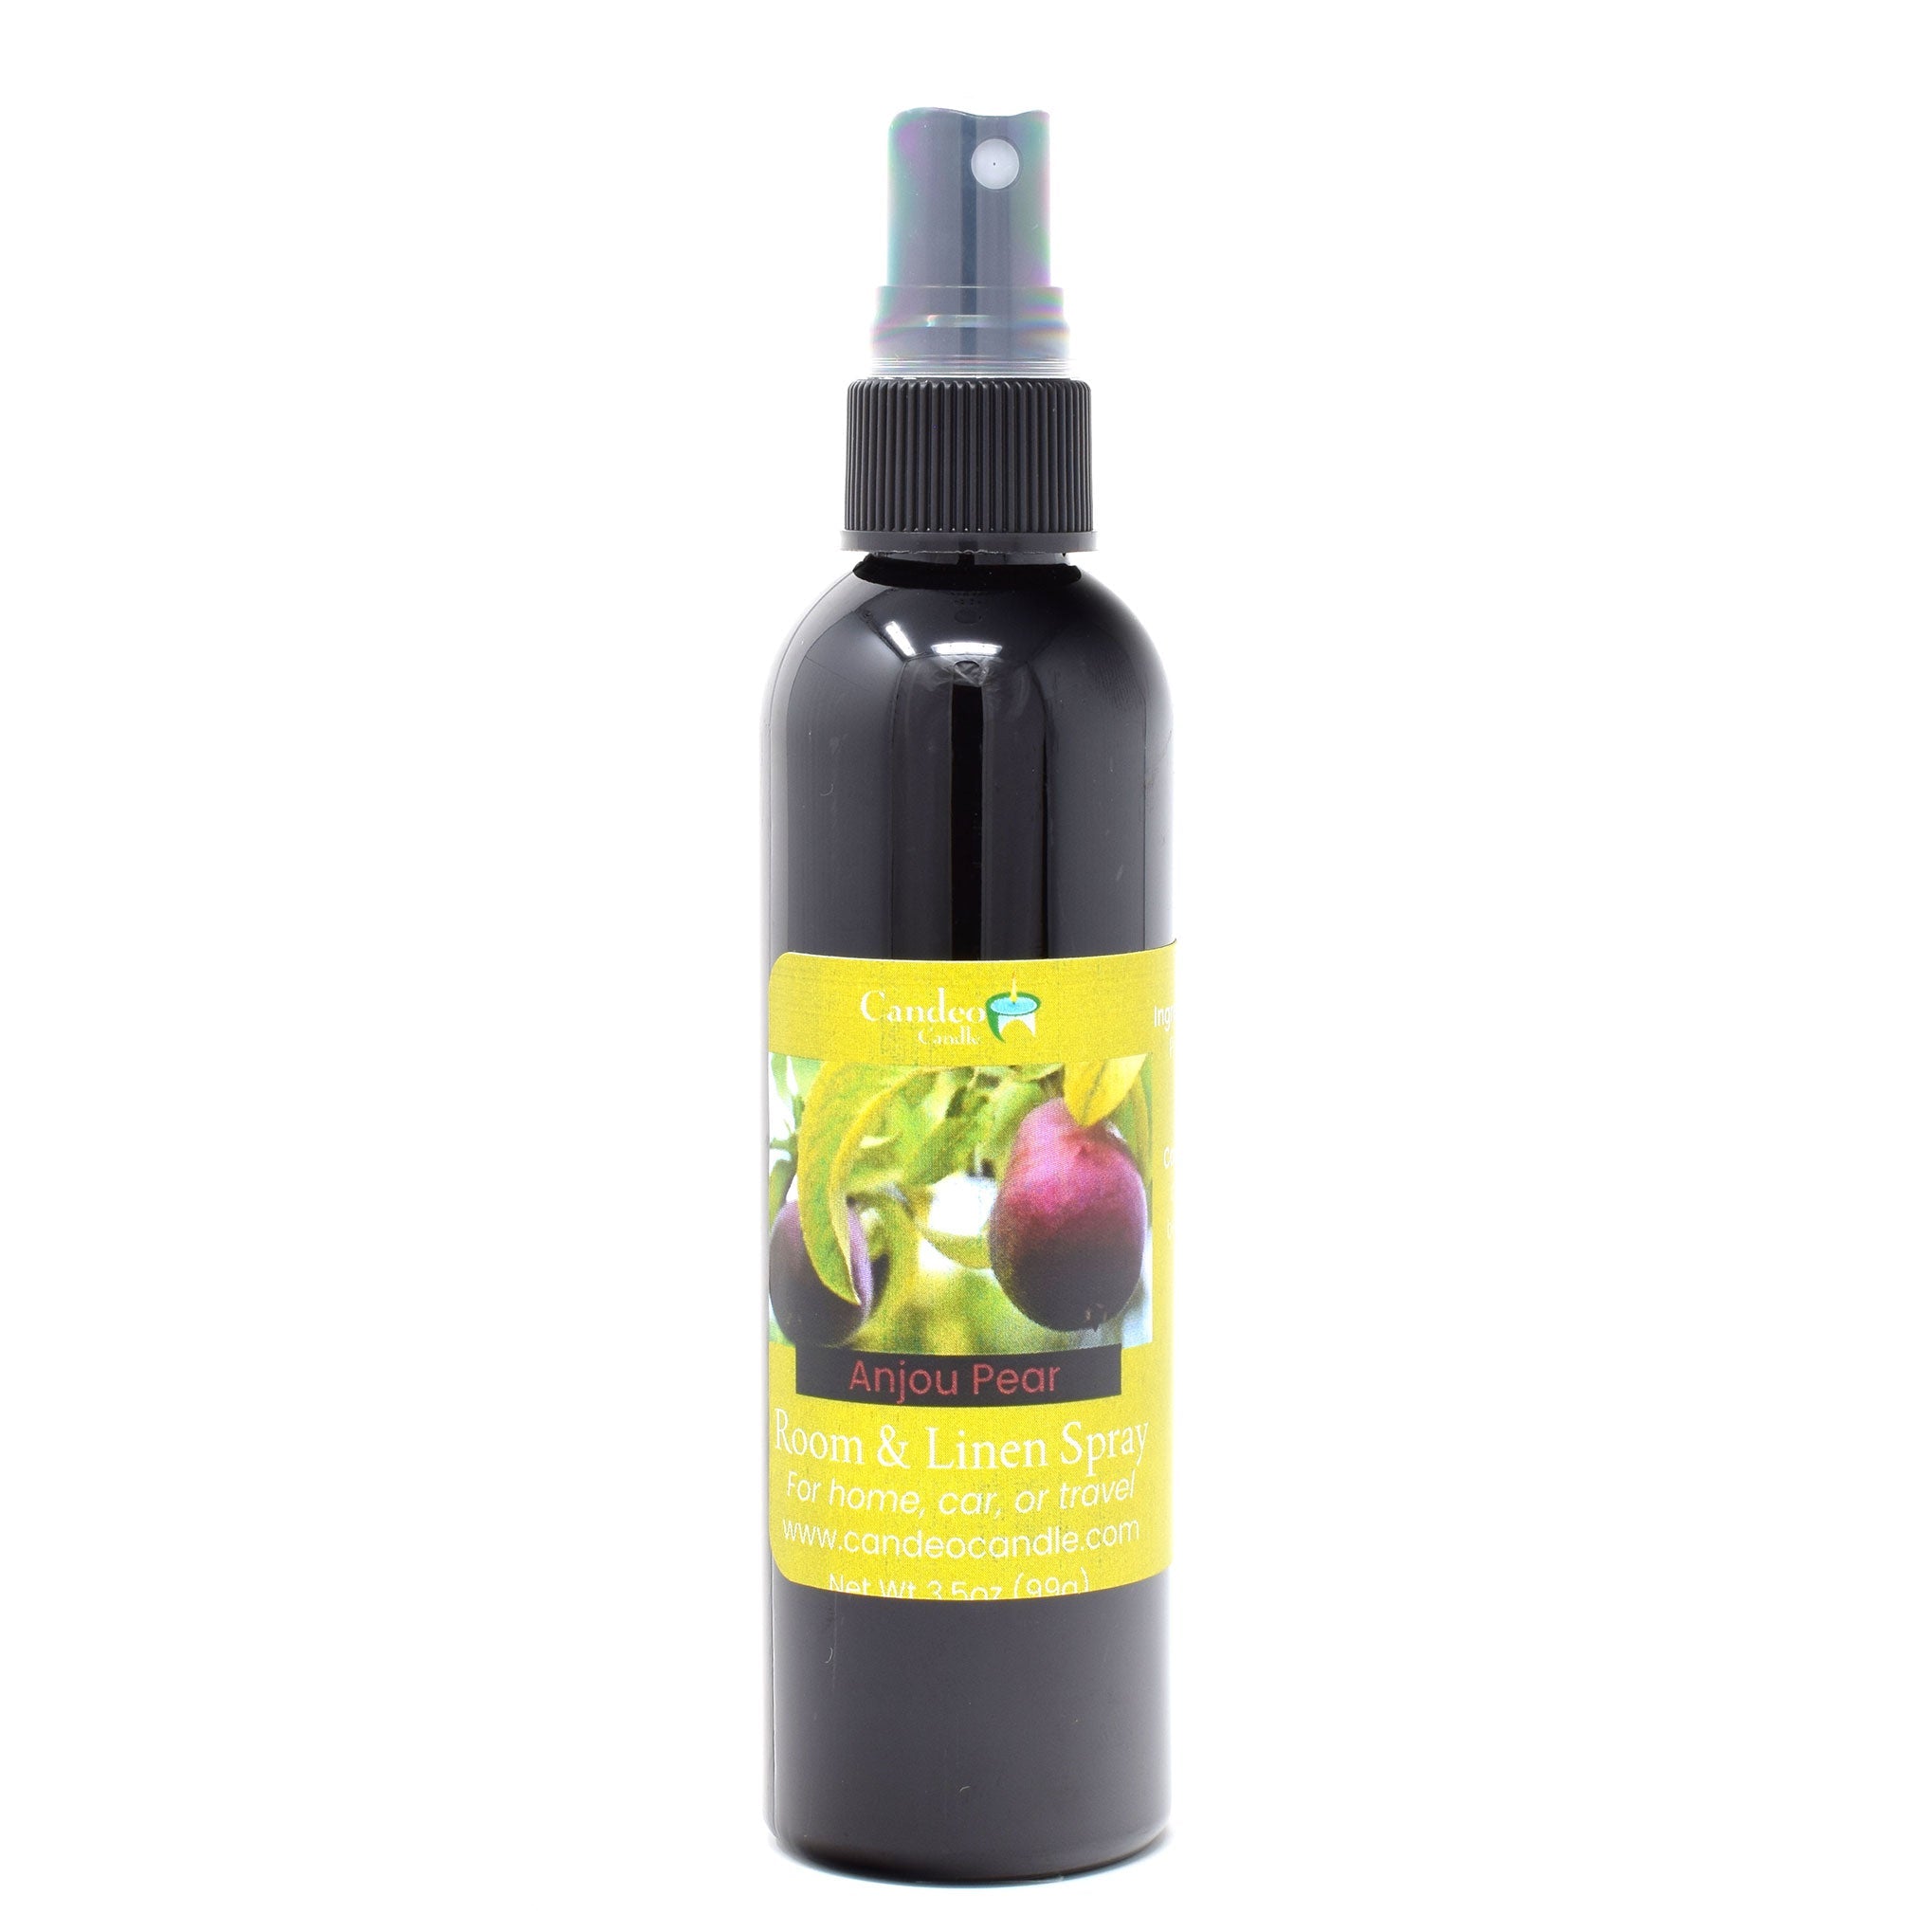 Anjou Pear, 3.5 oz Room Spray - Candeo Candle